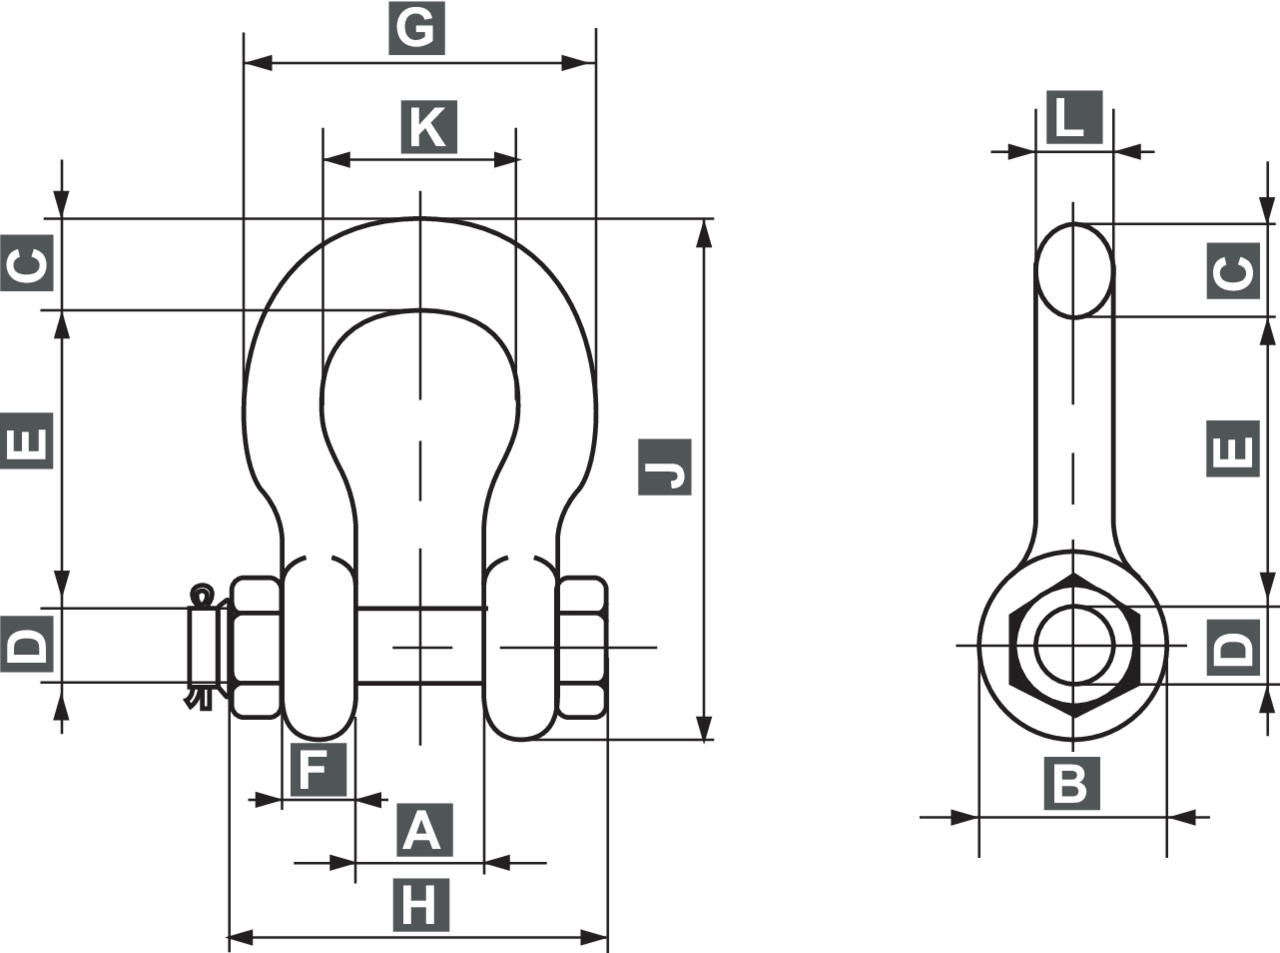 Crosby G-2140 Alloy Bolt Type Shackles measurements